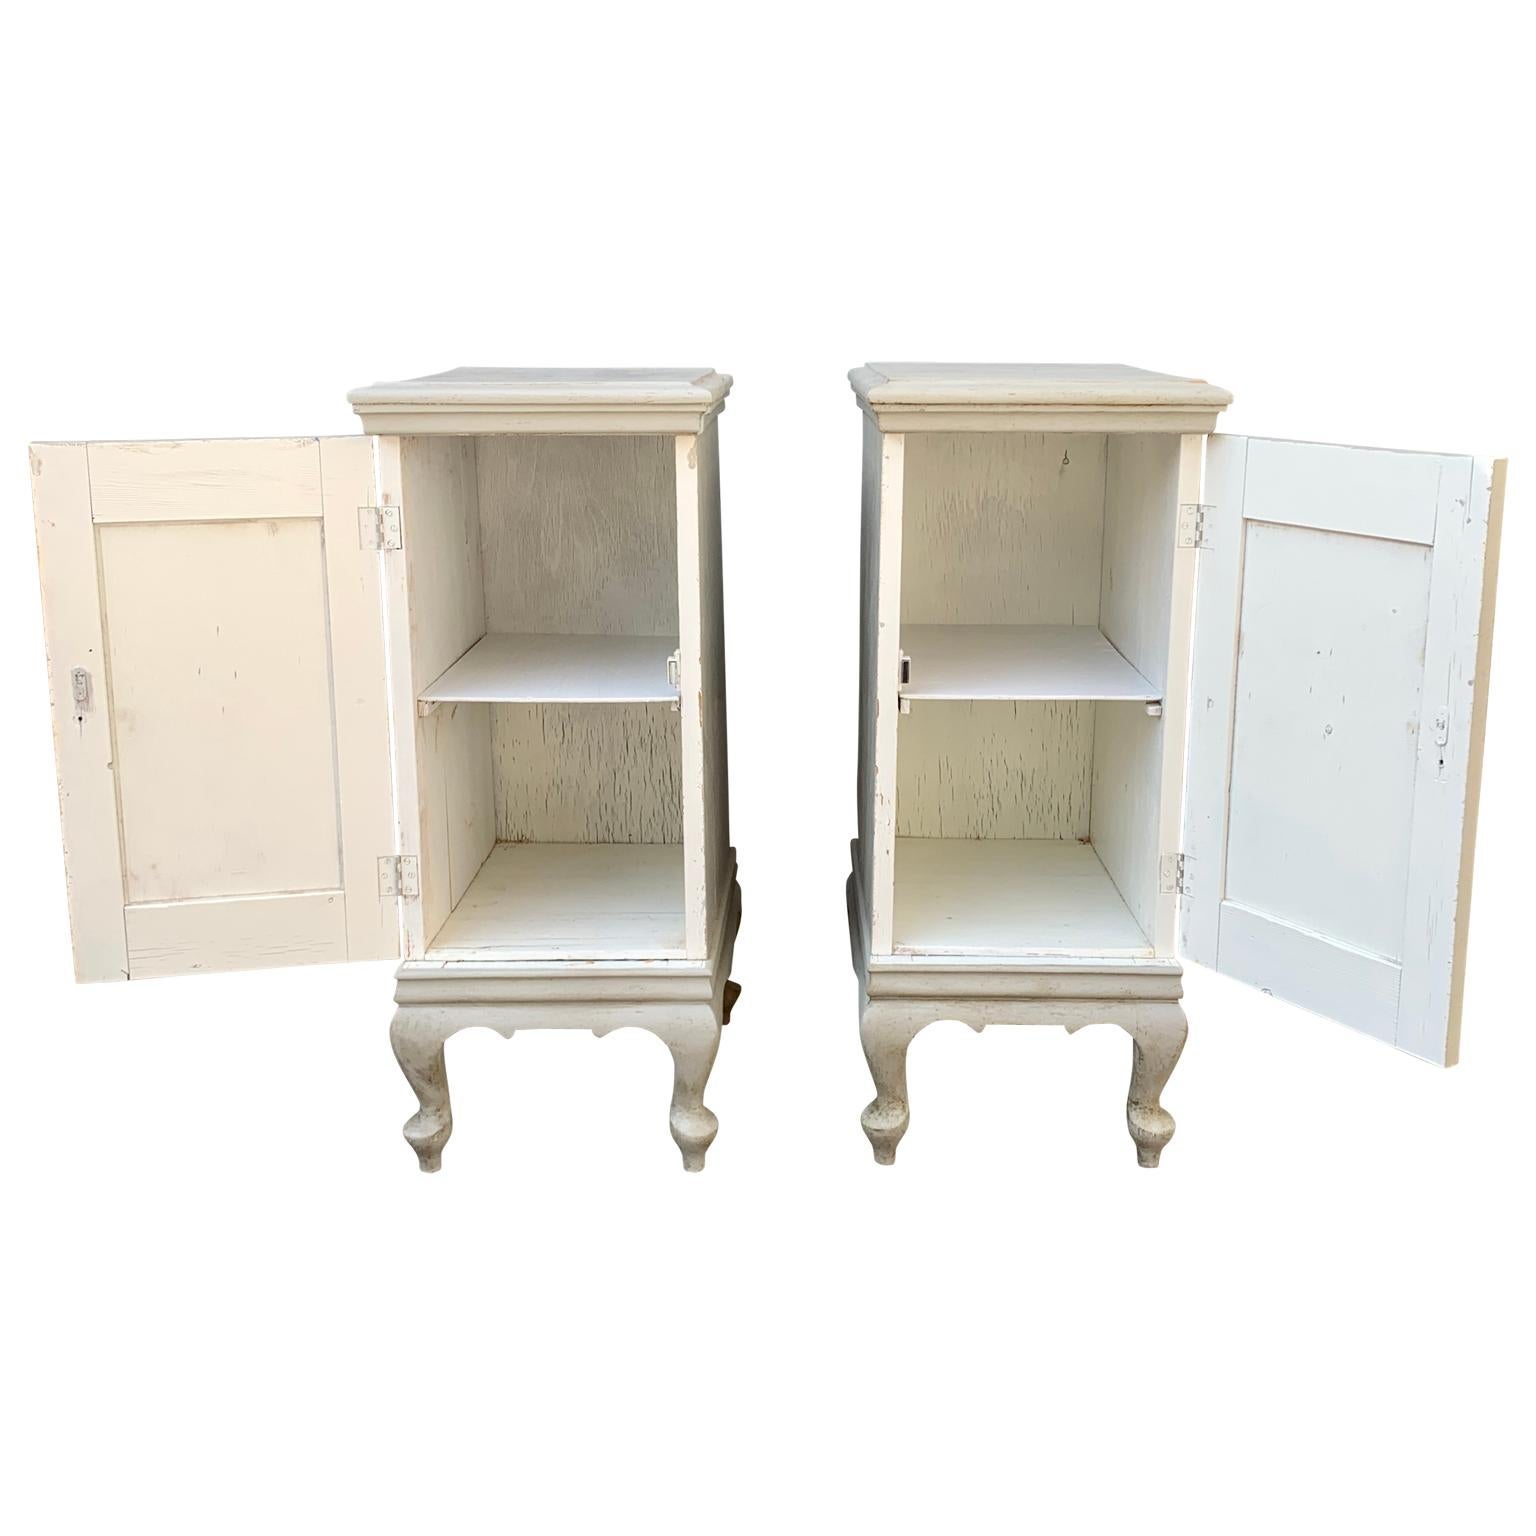 Pair of Swedish Painted Rococo Style Nightstands, Circa 1930's In Good Condition For Sale In Haddonfield, NJ